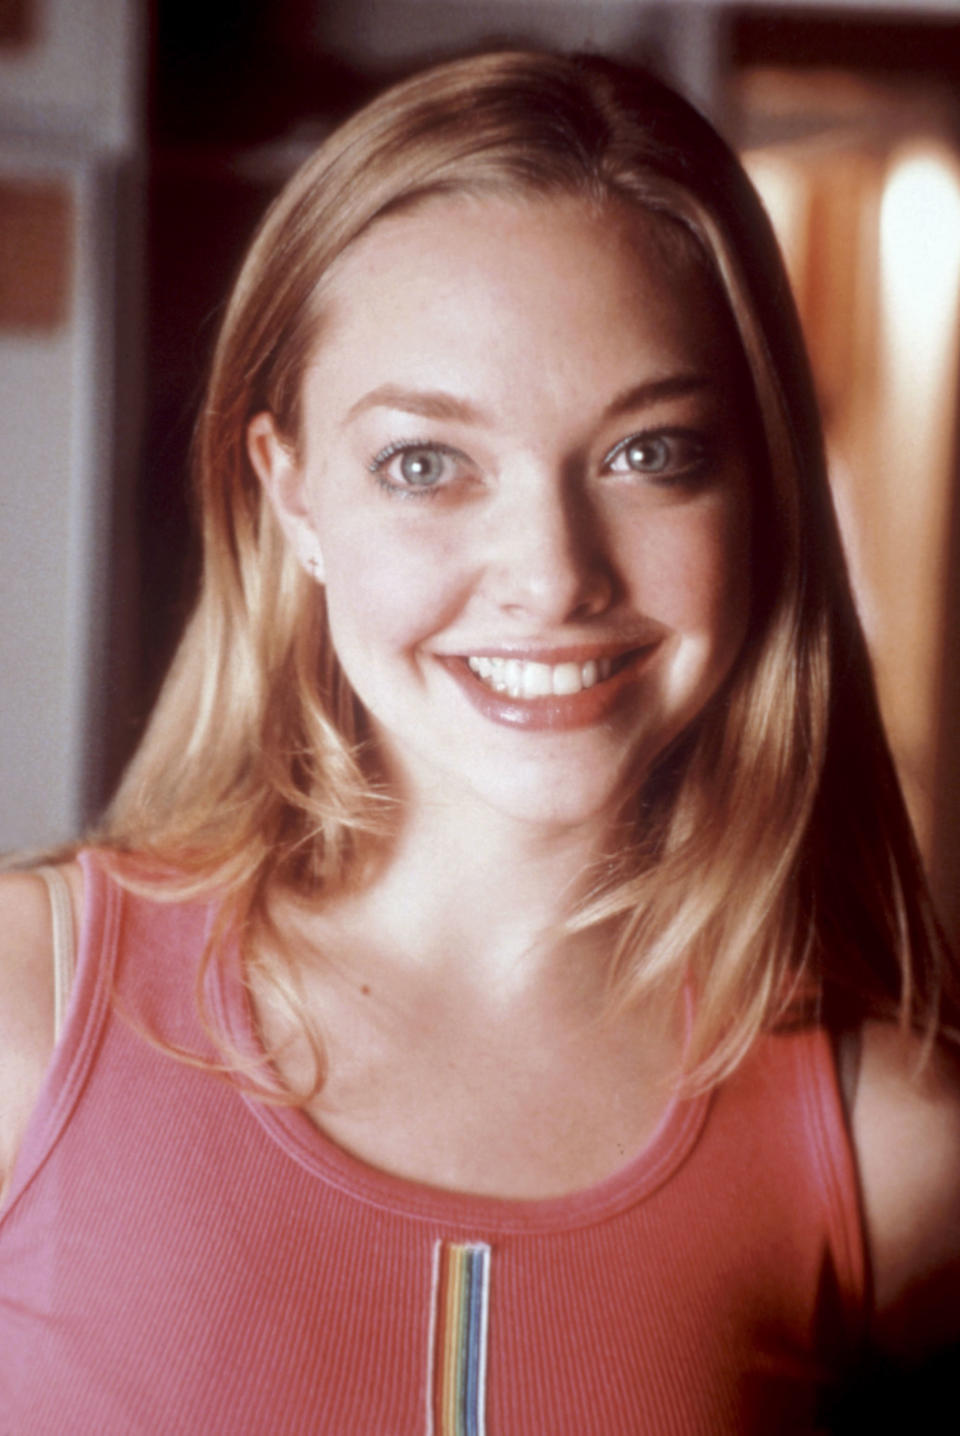 Mean Girls, Amanda Seyfried, 2004.©Paramount/Courtesy of Everett Collection